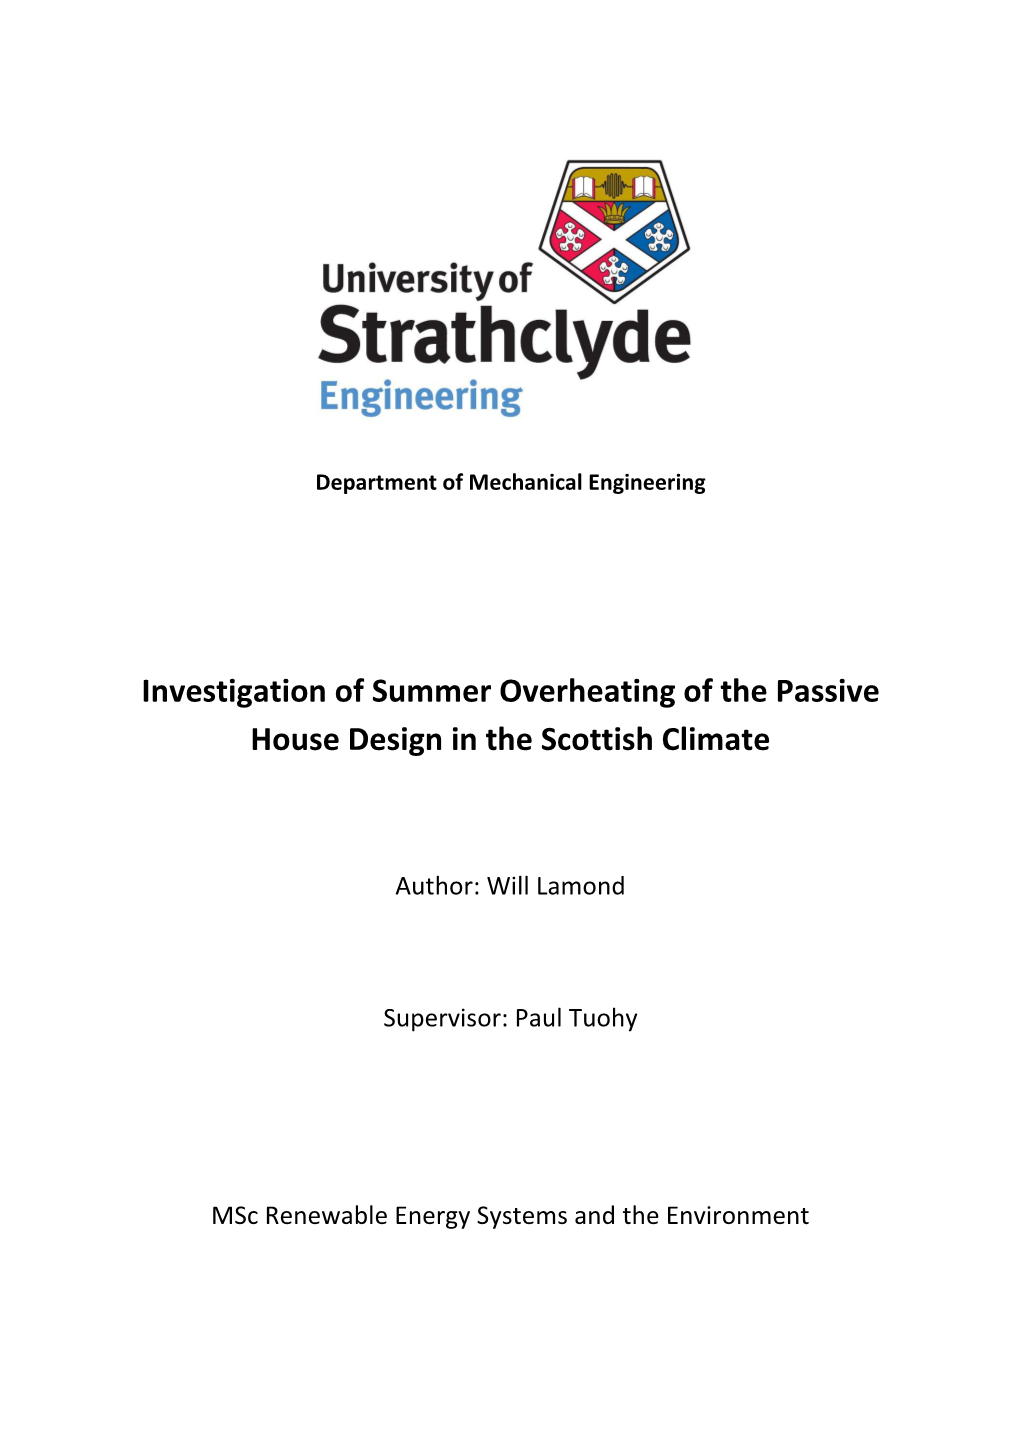 Investigation of Summer Overheating of the Passive House Design in the Scottish Climate